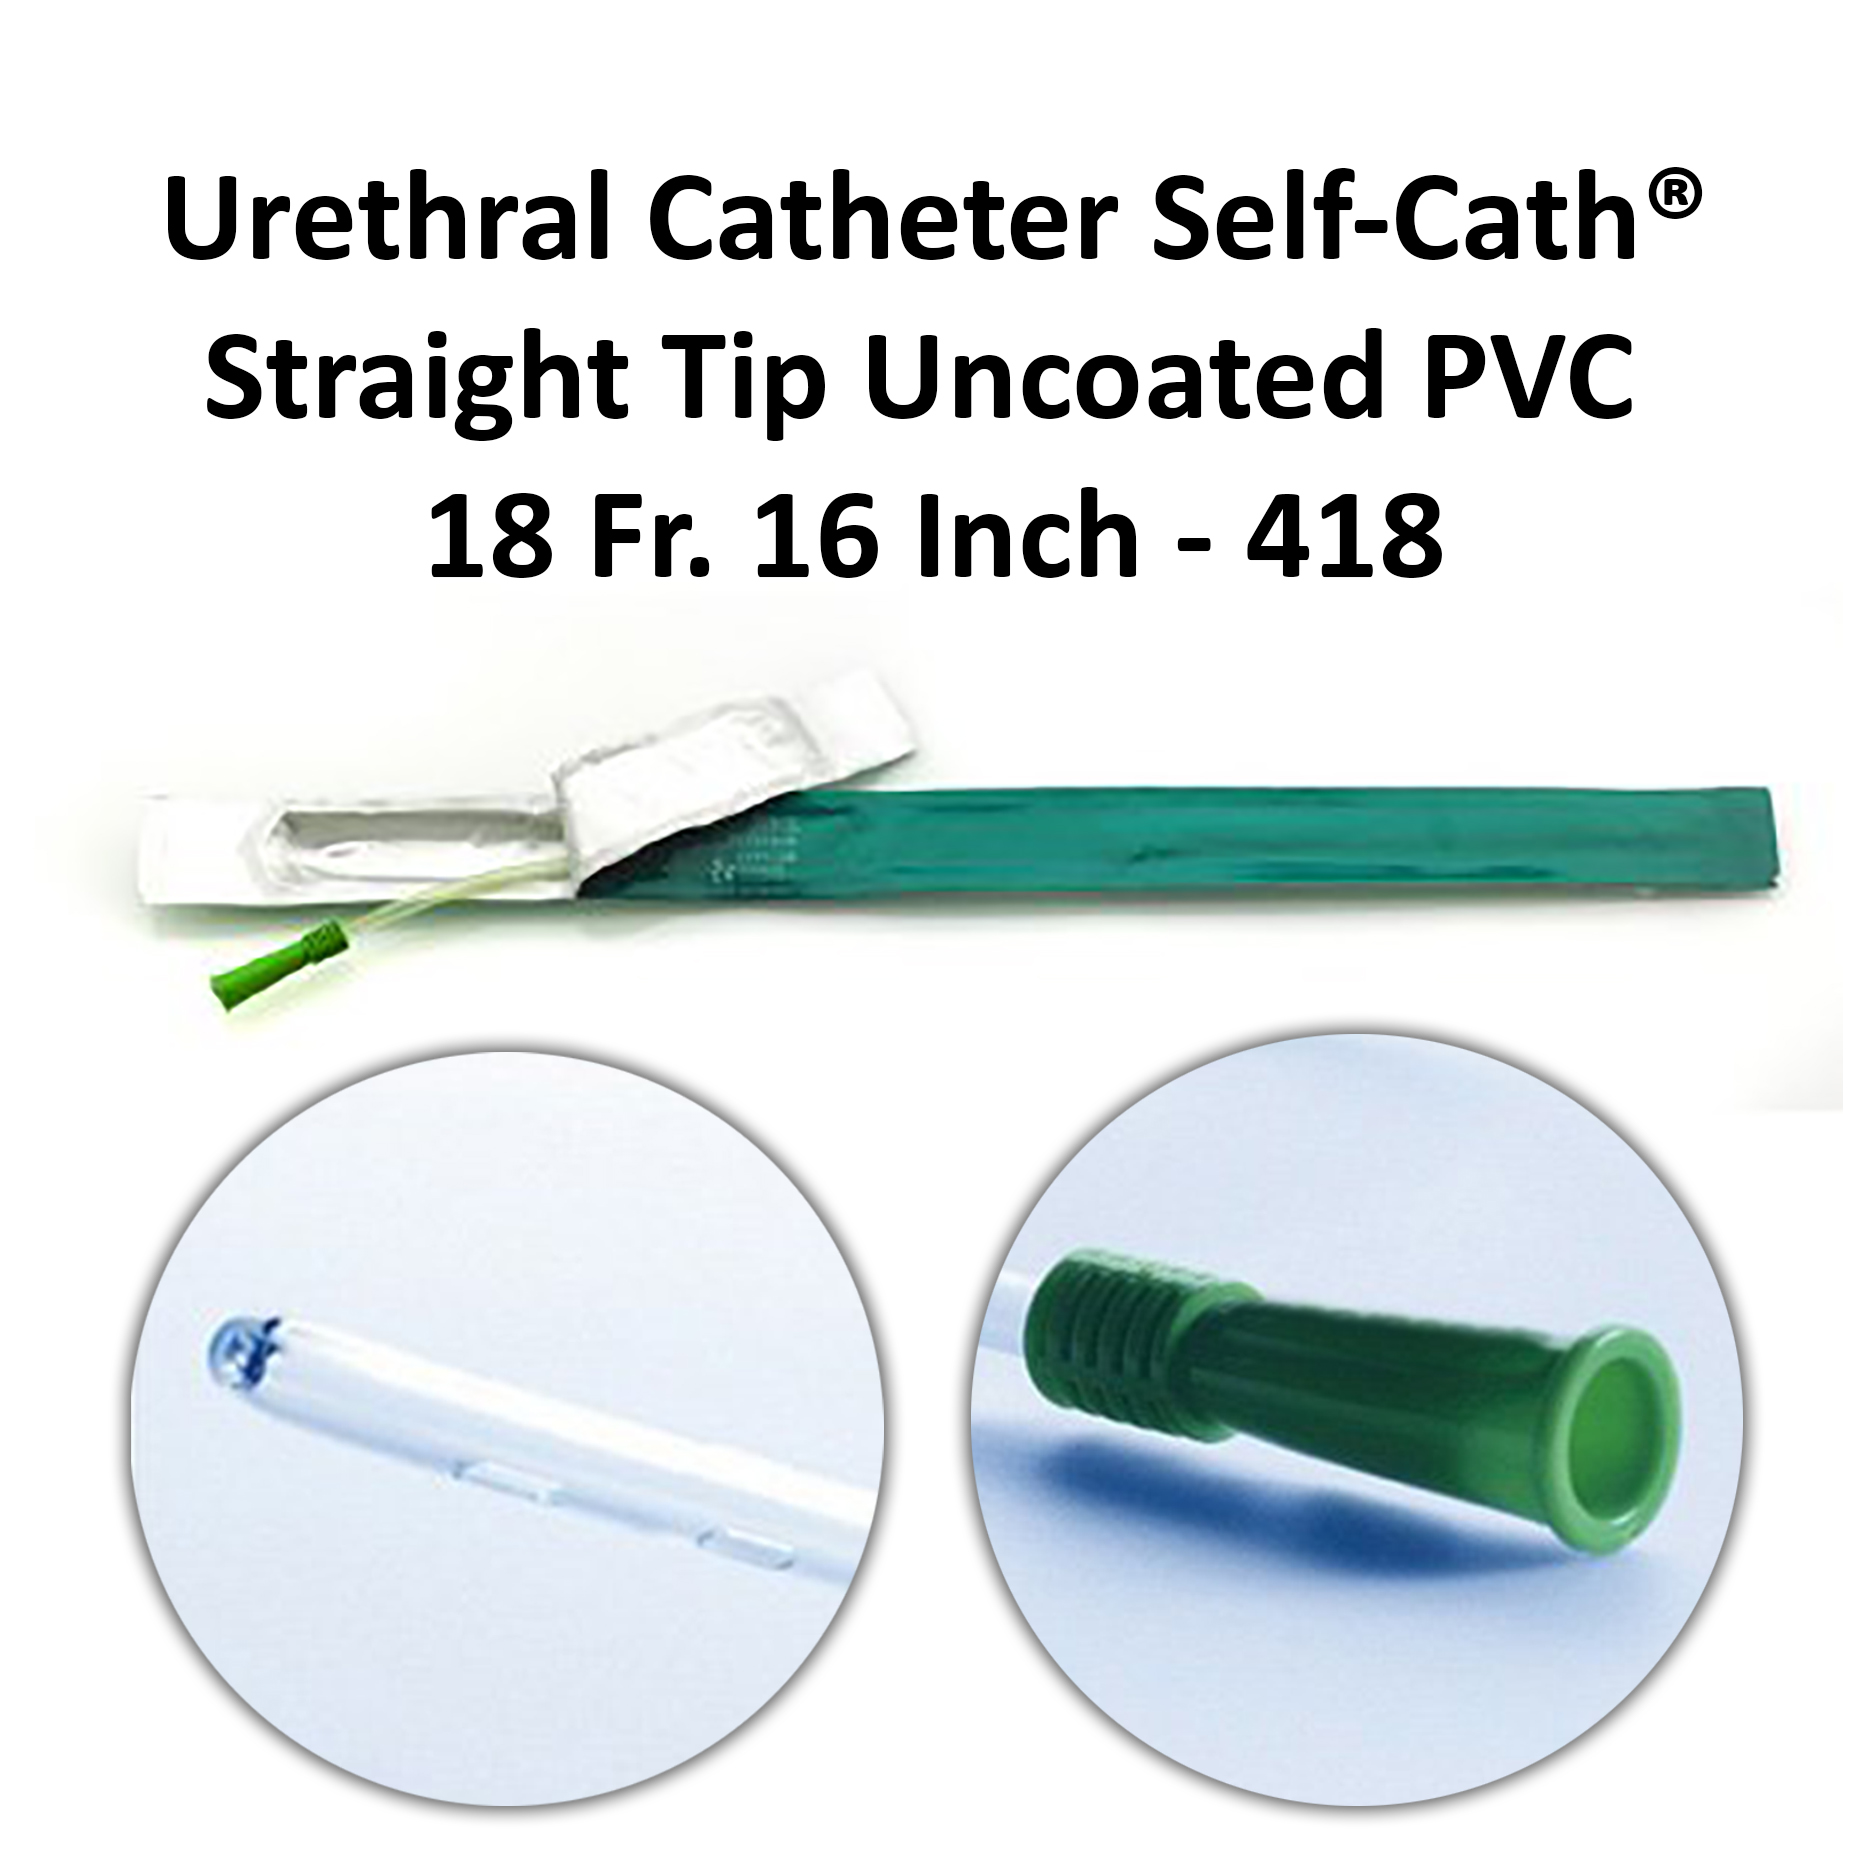 Urethral Catheter Self-Cath Straight Tip Uncoated PVC 18 Fr. 16 Inch - 418